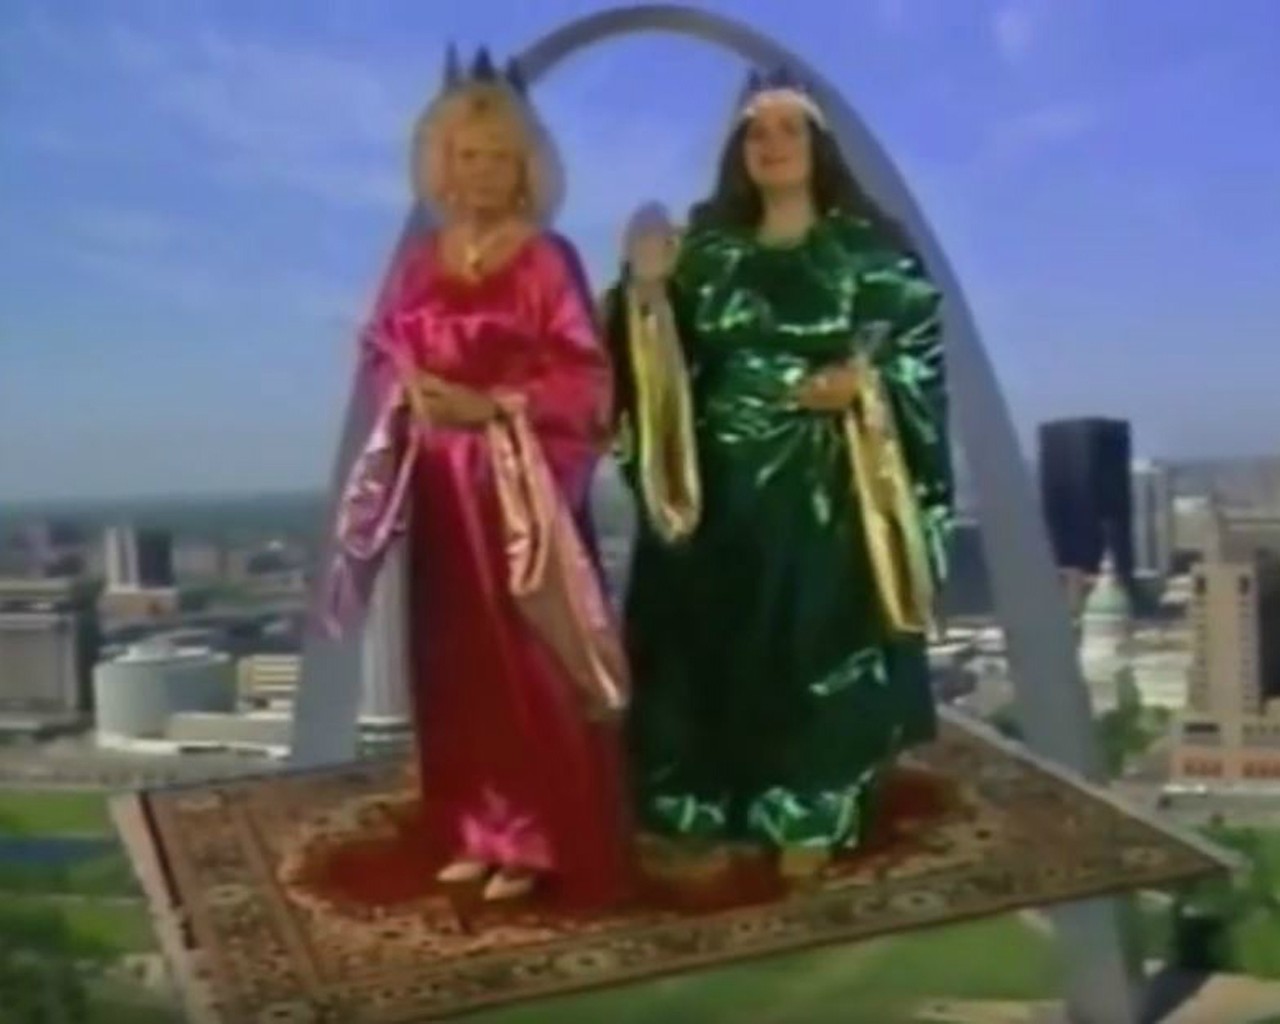 Becky's Carpet and Tile Superstore
Becky of Becky's Carpet and Tile Superstore was a glamorous vision who usually arrived on a flying carpet. Sometimes she was accompanied by Wanda Princess of Tile. These royal ladies just wanted to sell you some discount floor coverings, and the air near the Arch was their kingdom.
Photo courtesy of YouTube